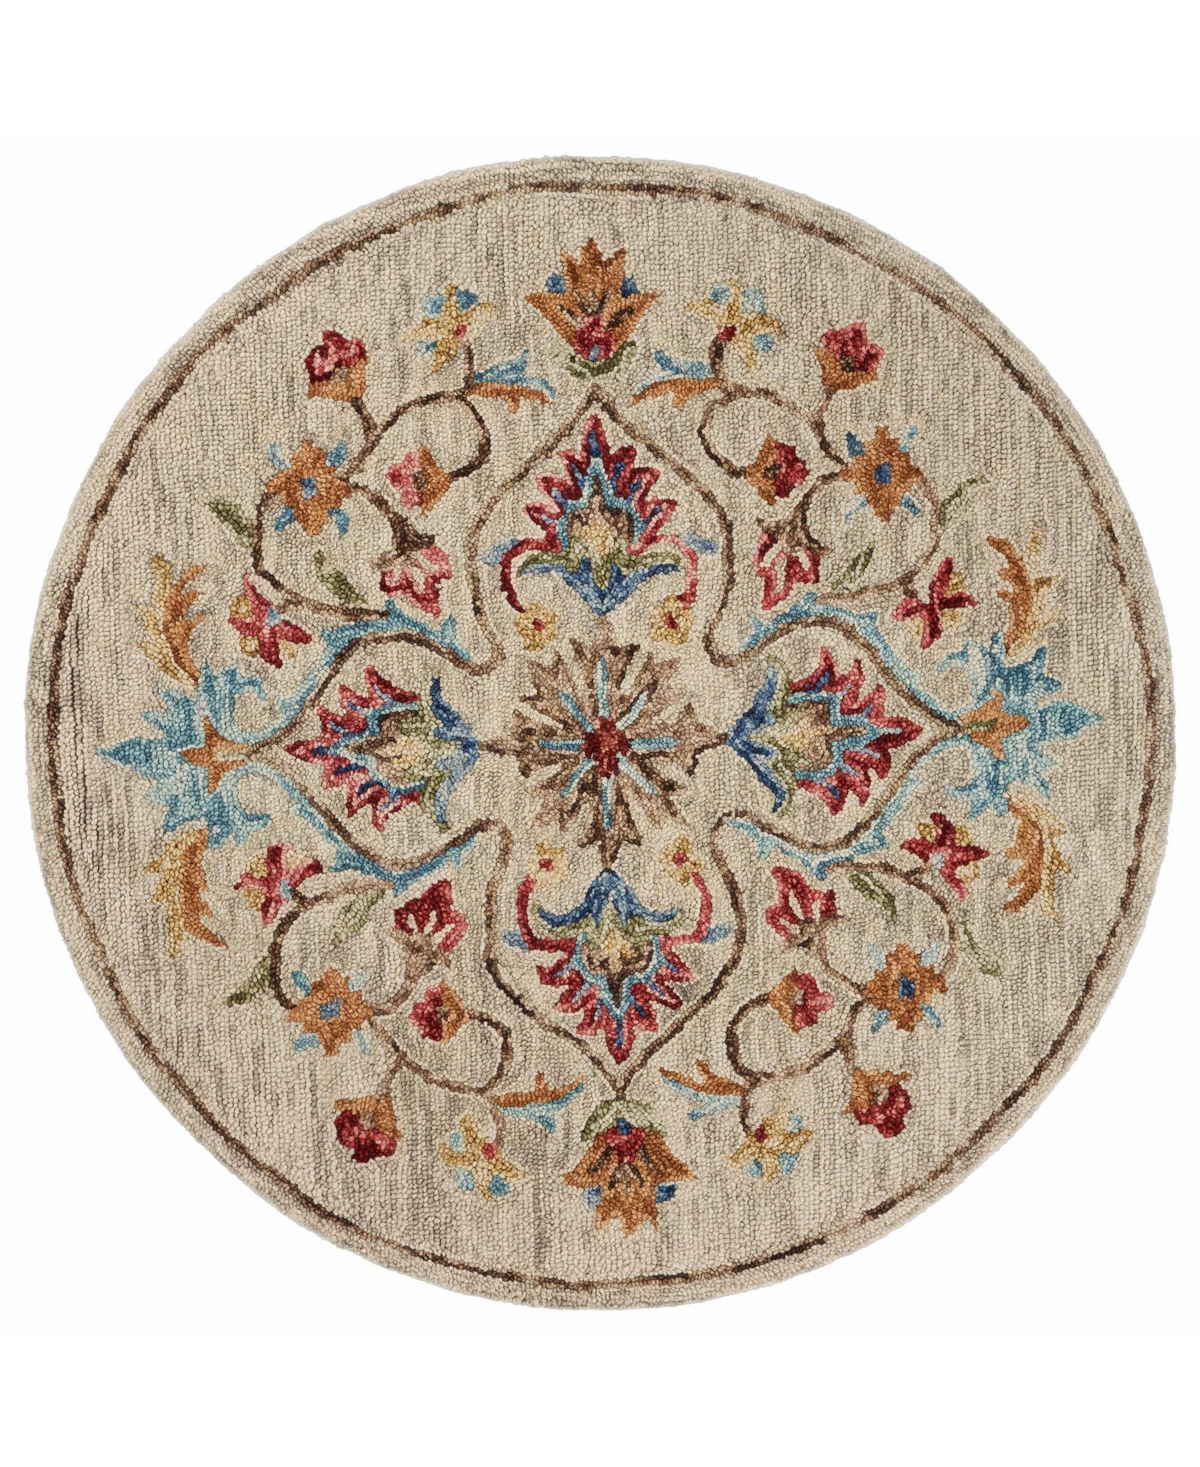 Lr Home Sweet Sinuo54102 4' X 4' Round Area Rug In Beige